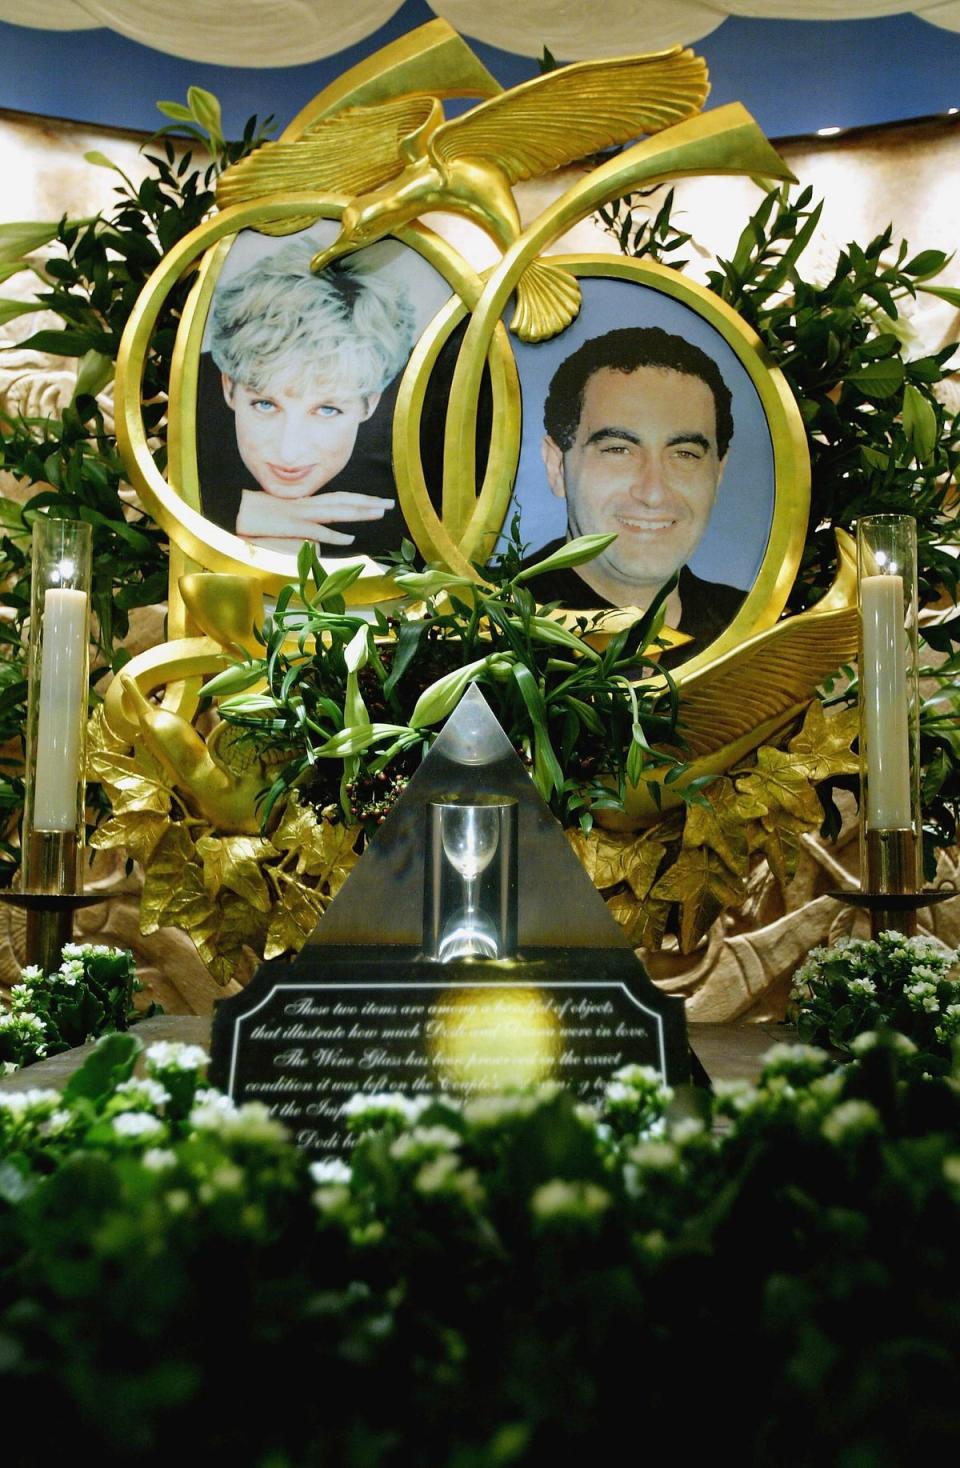 The memorial to Princess Diana and Dodi Fayad is seen in Harrods department store, December 2003 (Getty)